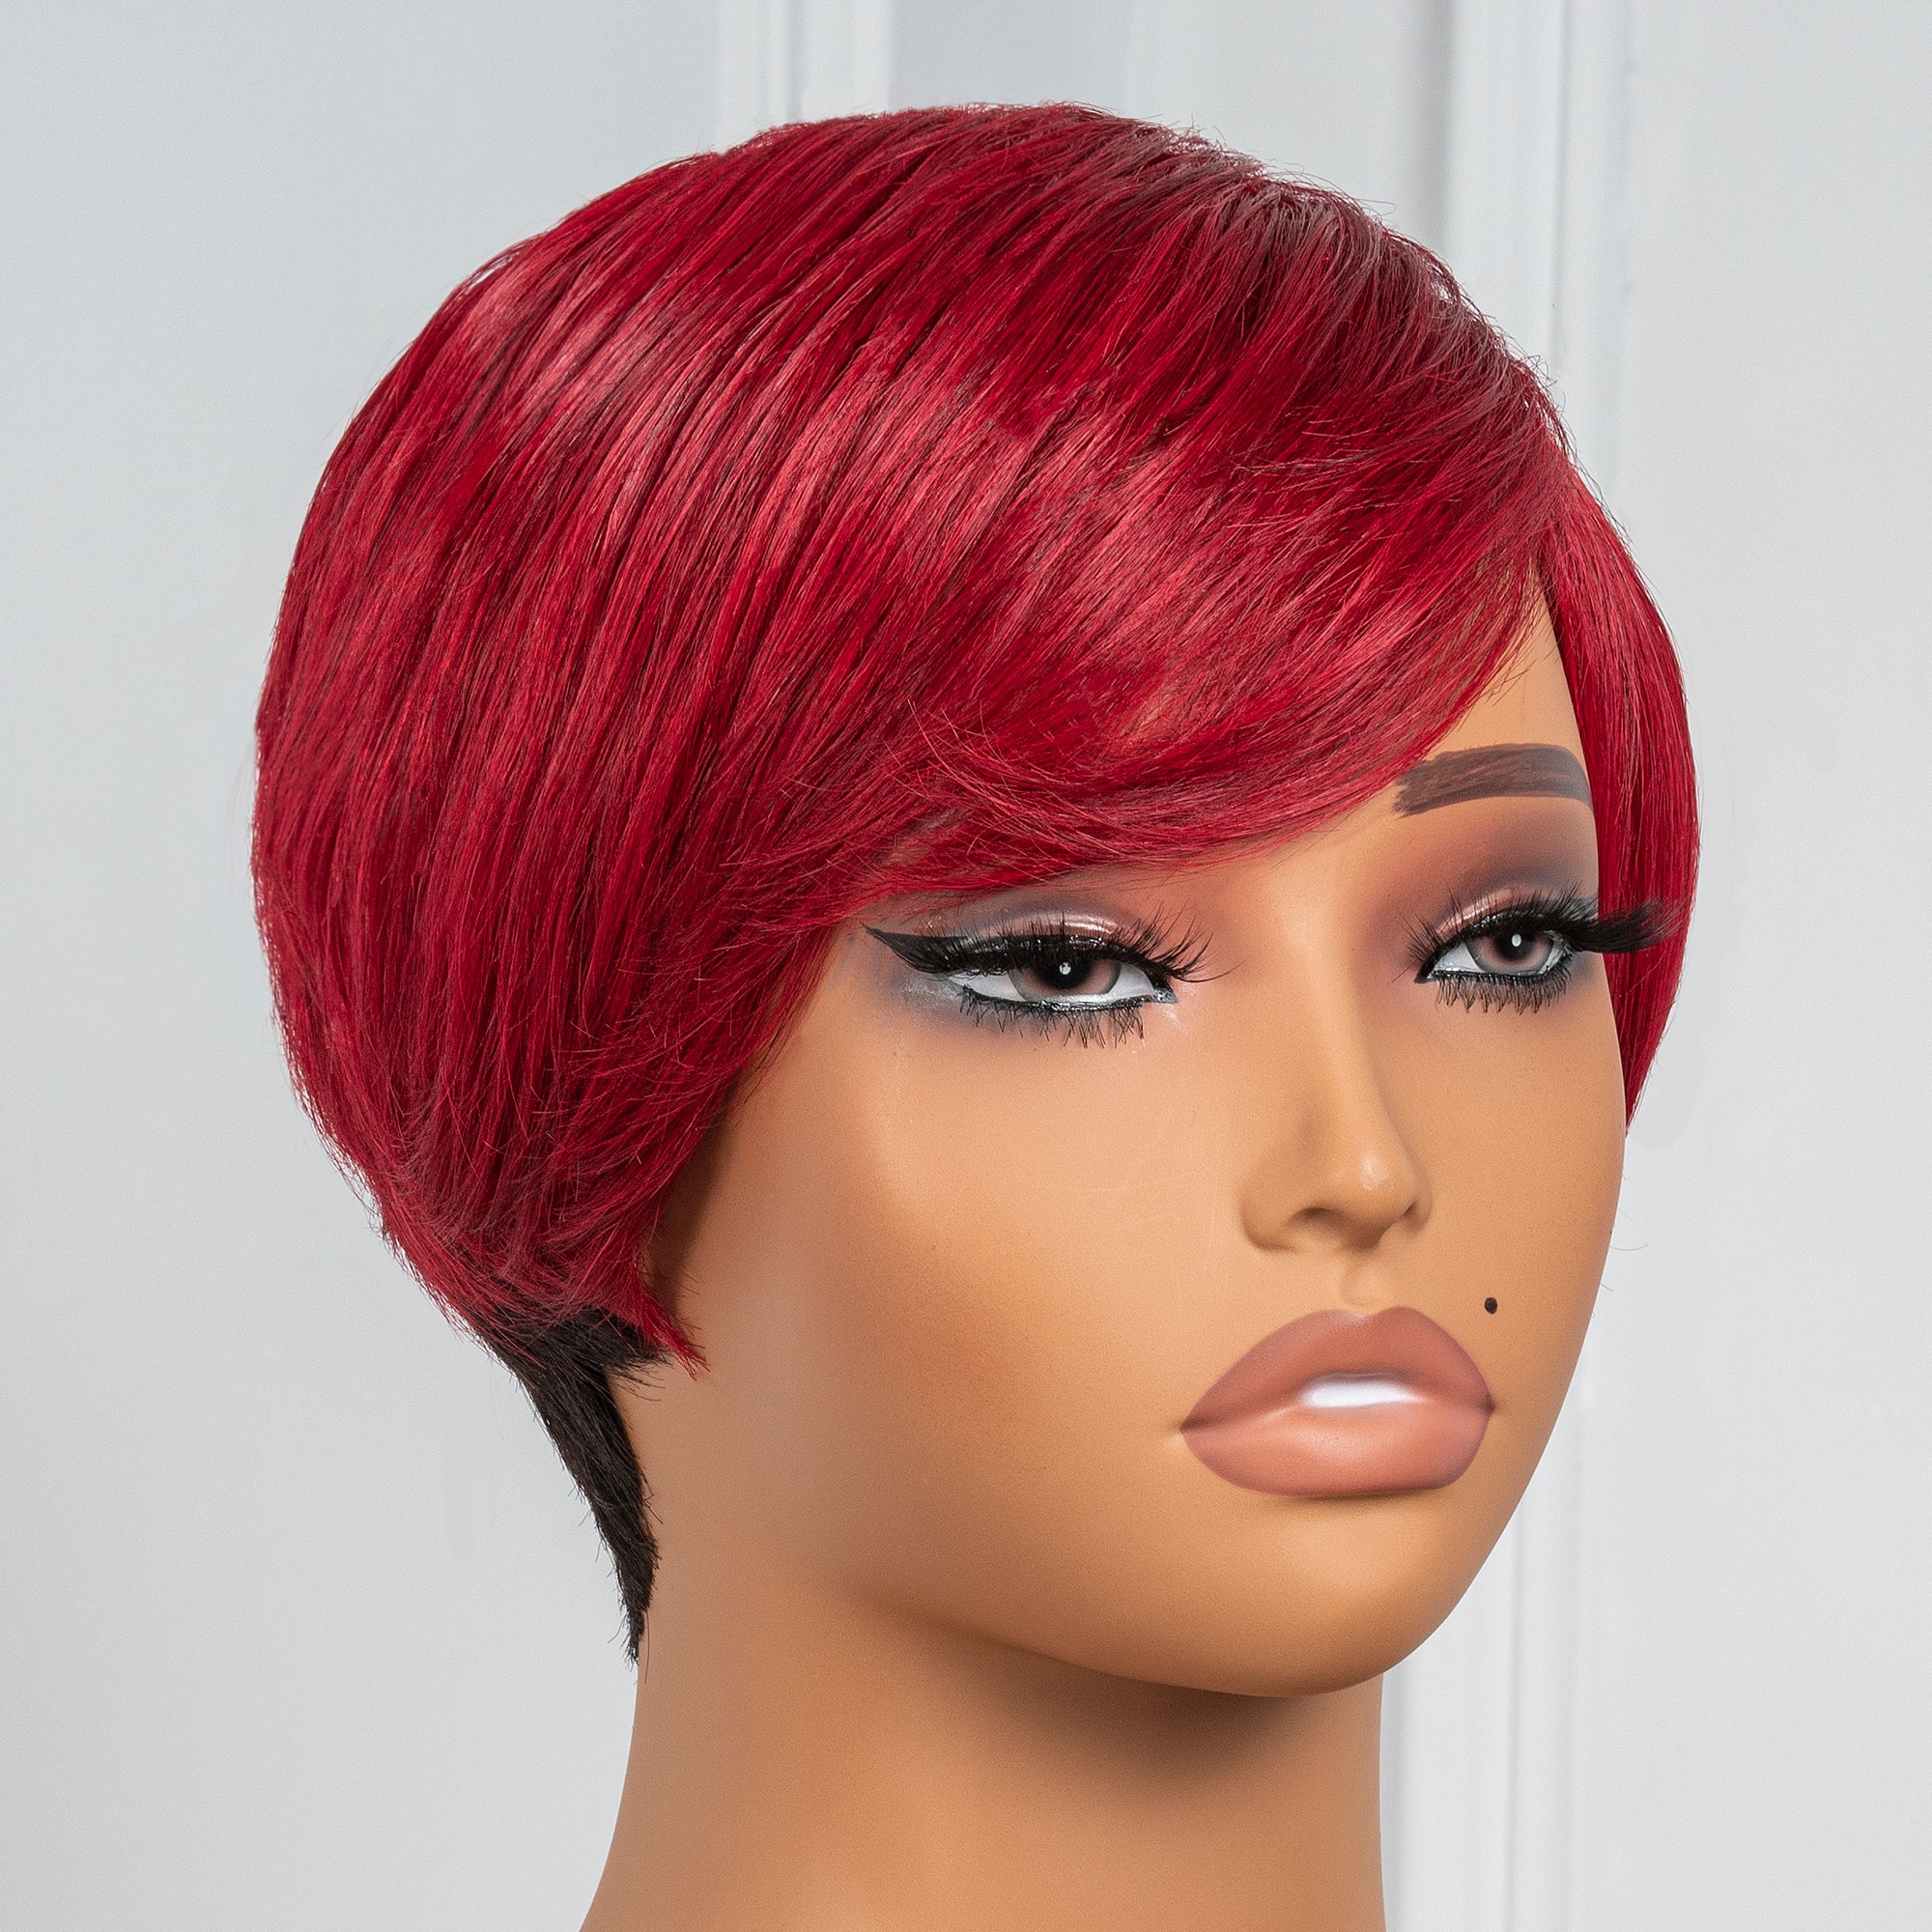 TOYOTRESS VANESSA SHORT NEAT HUMAN HAIR WIG WITH SIDE BANGS 4